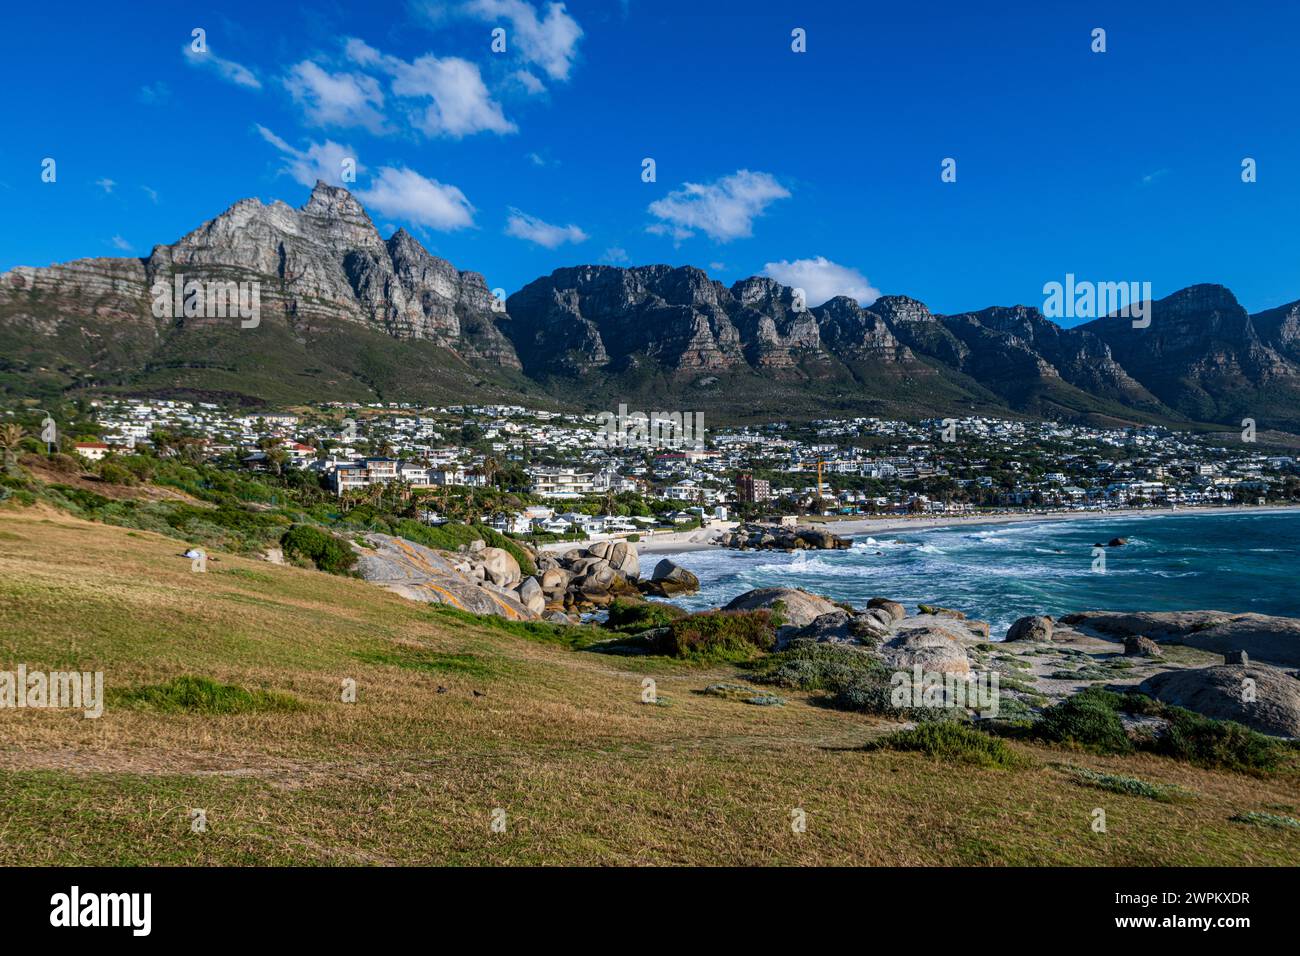 Fine sand beach under the Twelve Apostles, Camps Bay, Cape Town, South Africa, Africa Stock Photo